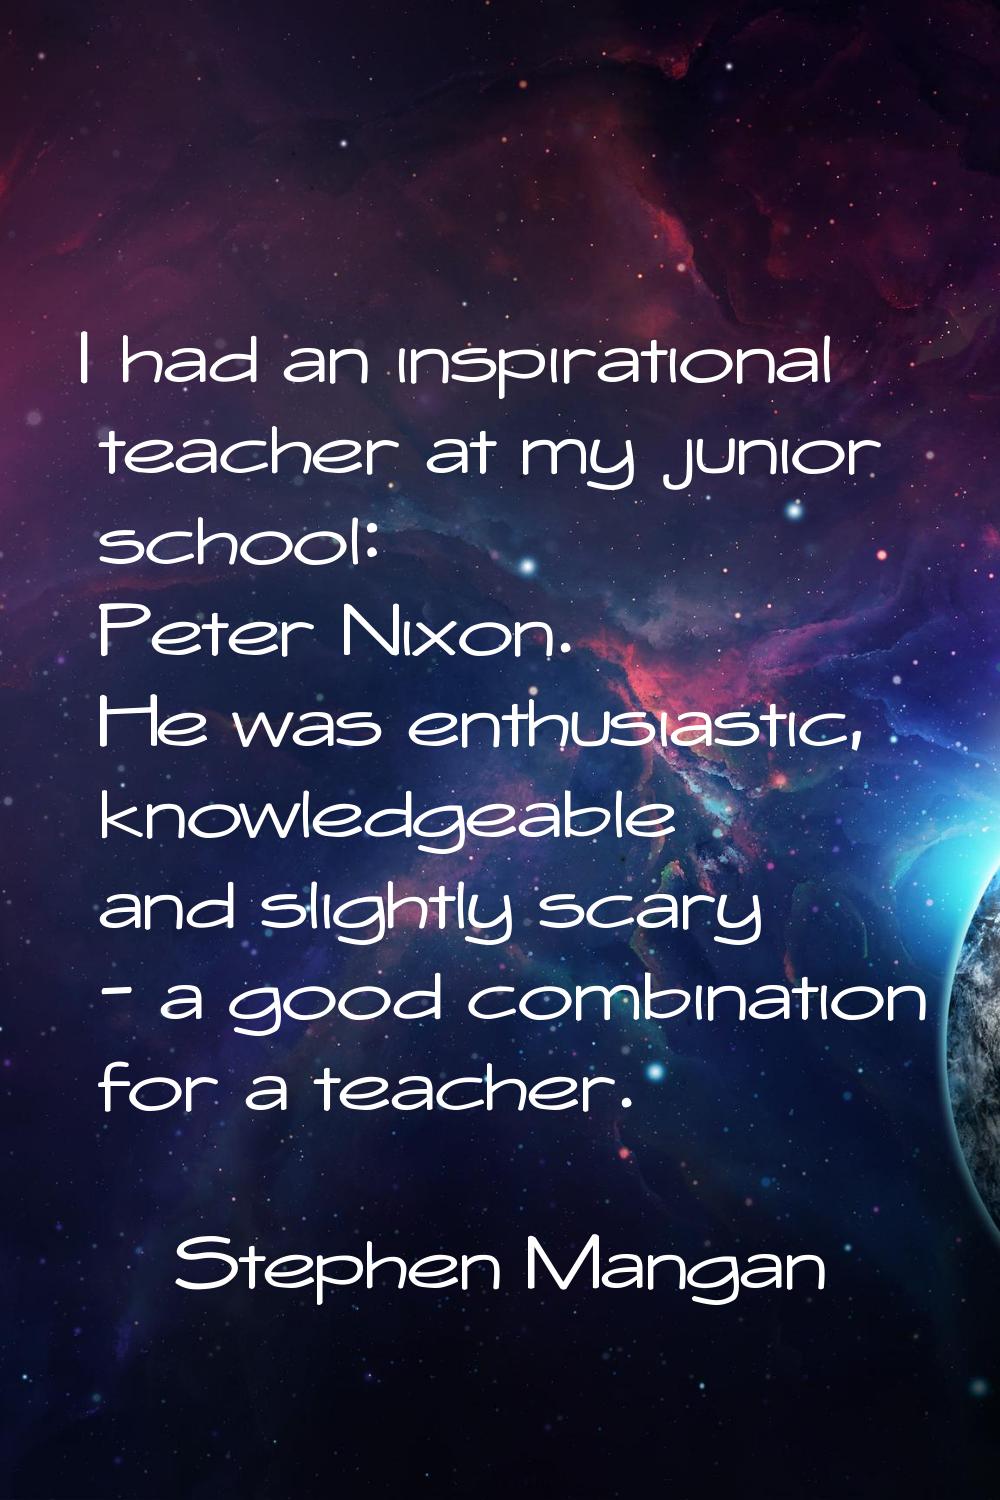 I had an inspirational teacher at my junior school: Peter Nixon. He was enthusiastic, knowledgeable